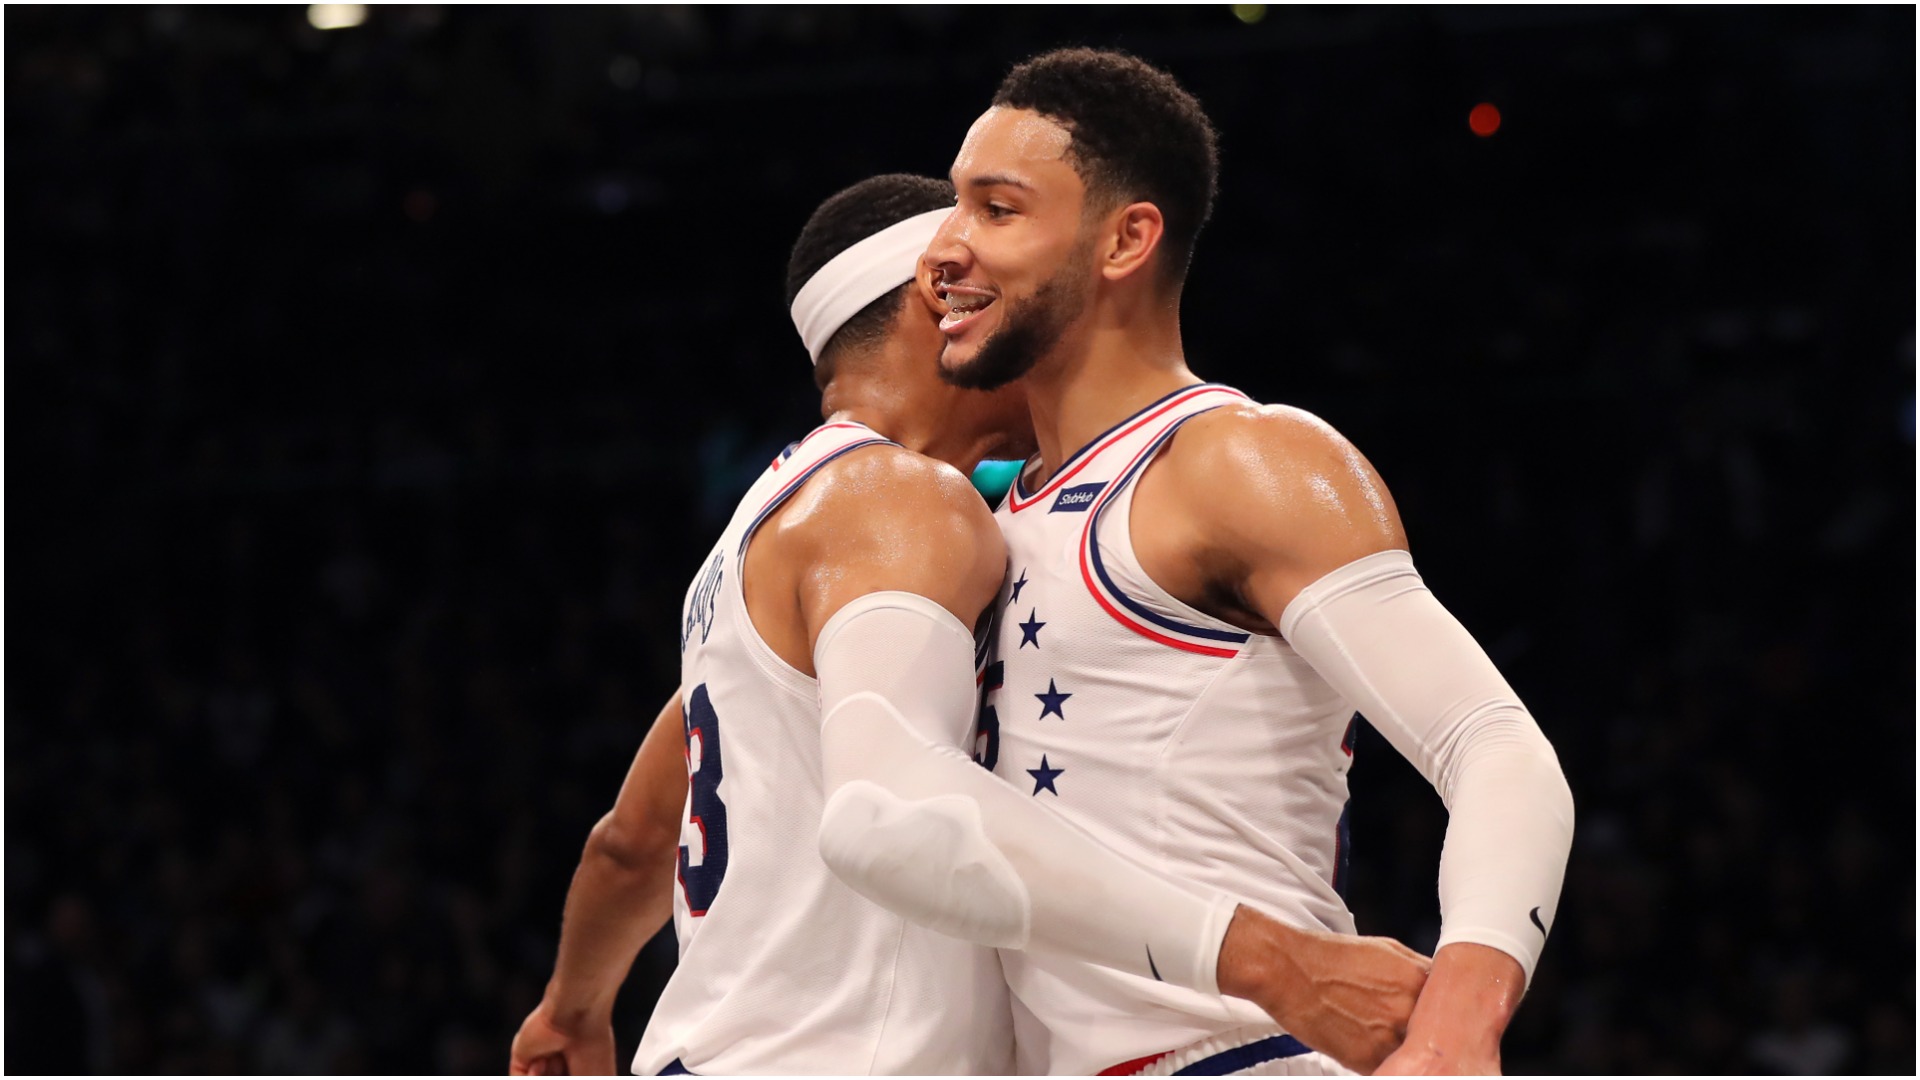 Ben Simmons tallied a playoff career-high to help the 76ers to victory in Brooklyn and earned effusive praise from coach Brett Brown.